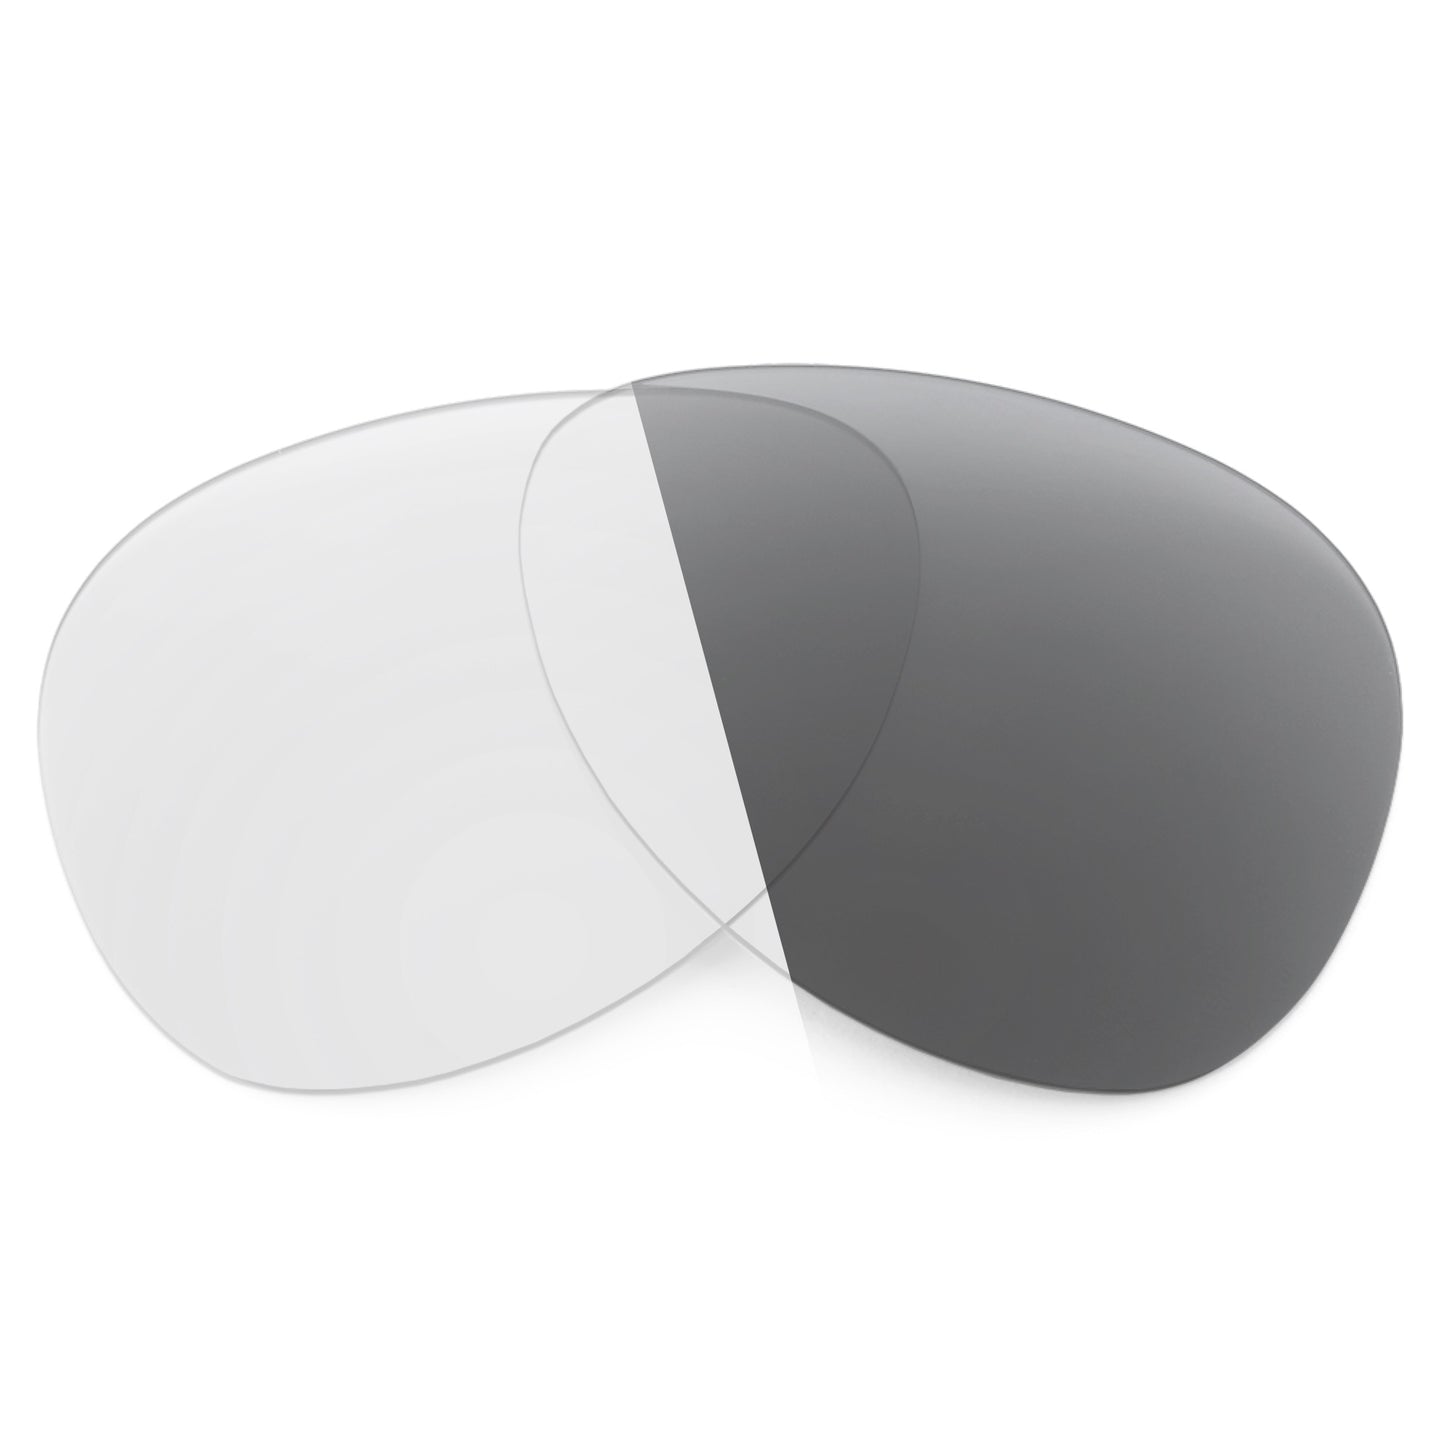 Revant replacement lenses for Ray-Ban RB3533 57mm Non-Polarized Adapt Gray Photochromic